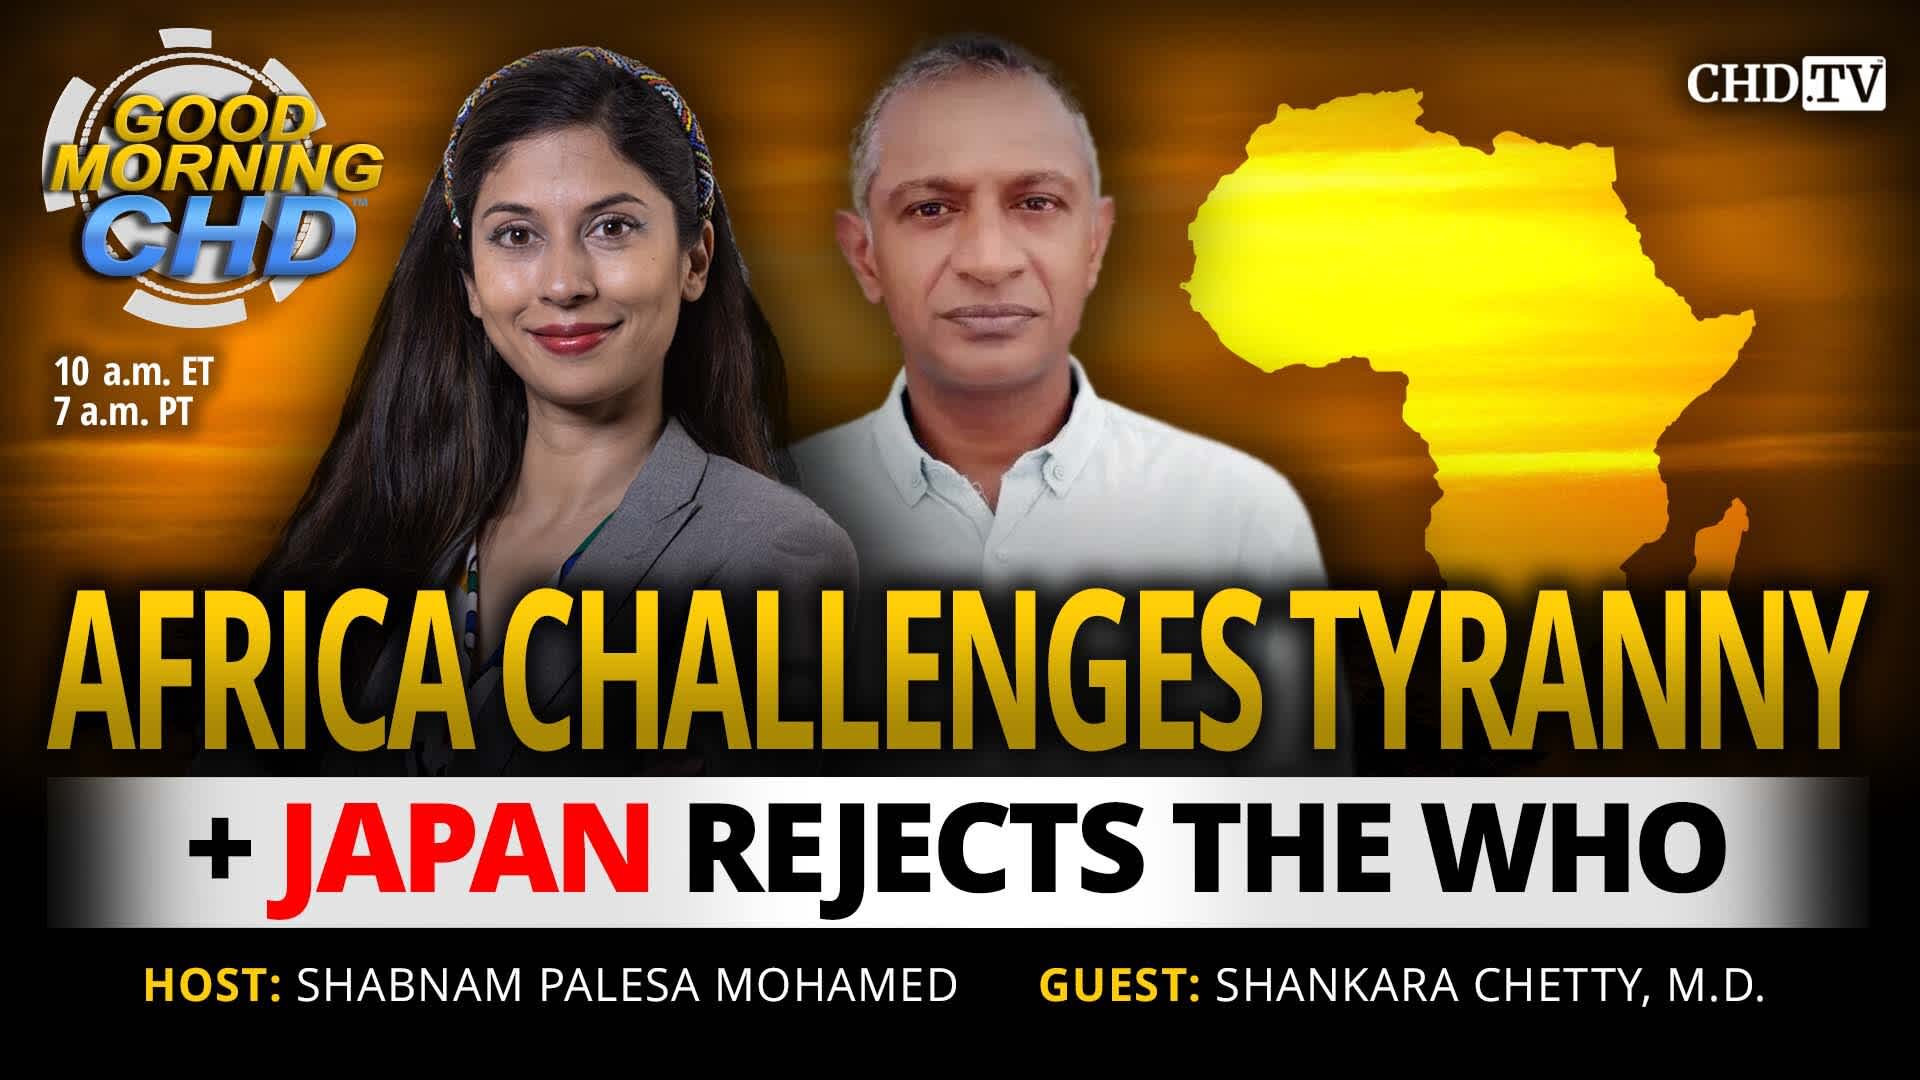 Africa Challenges Tyranny + Japan Rejects the WHO